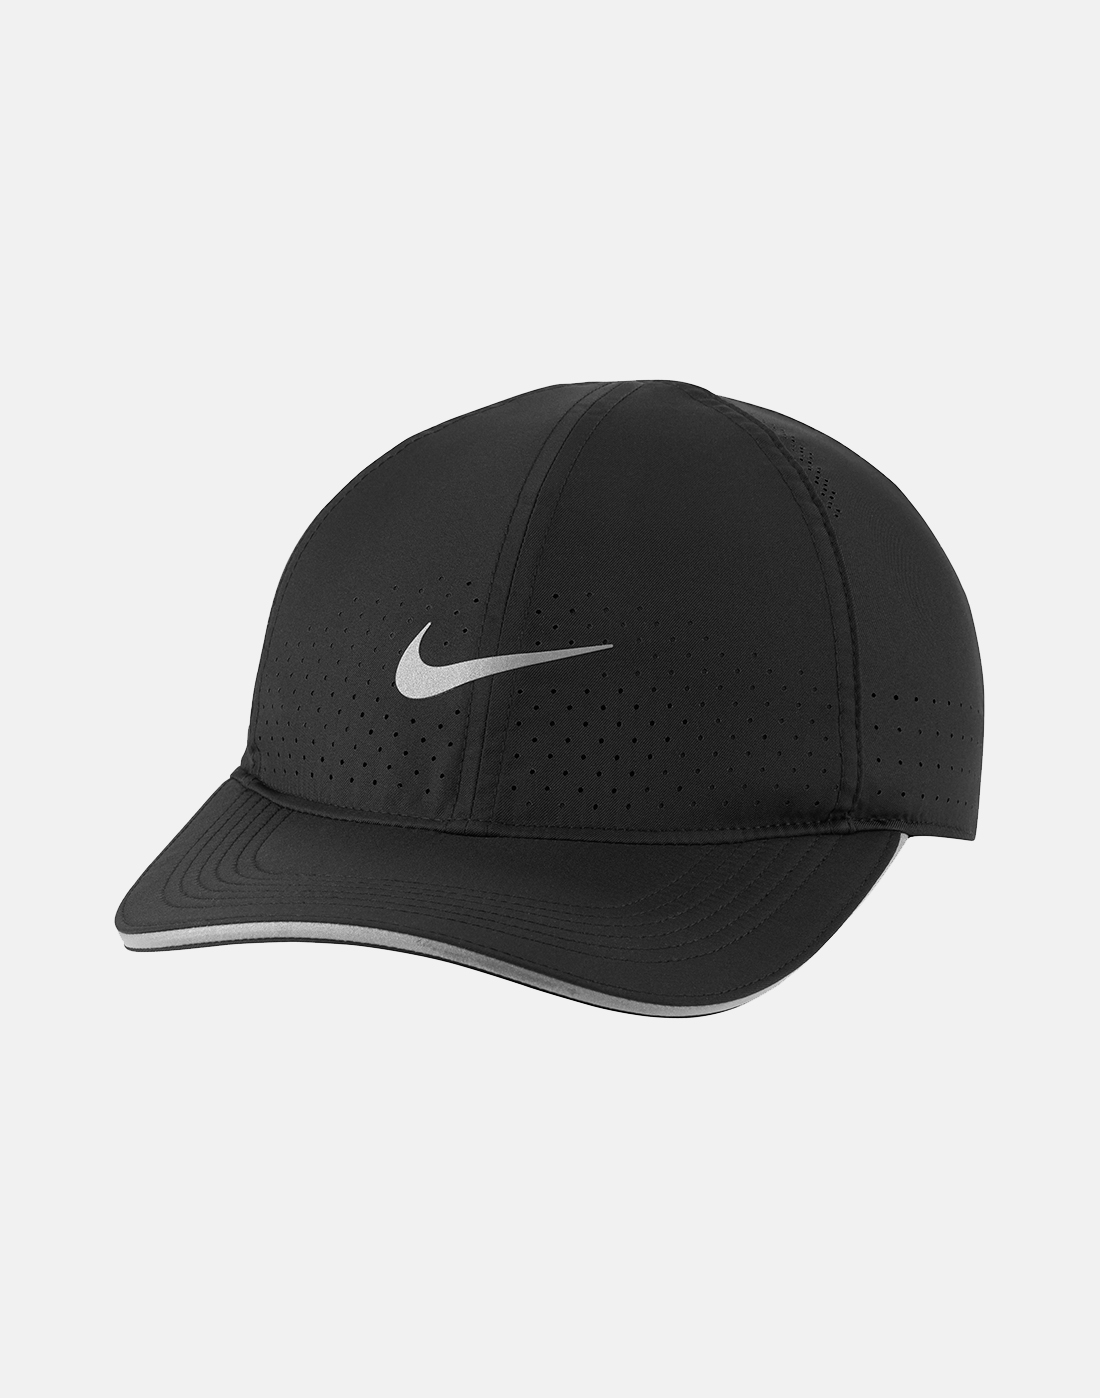 Nike Dry Arobill Performance Running Cap - Black | Life Style Sports IE